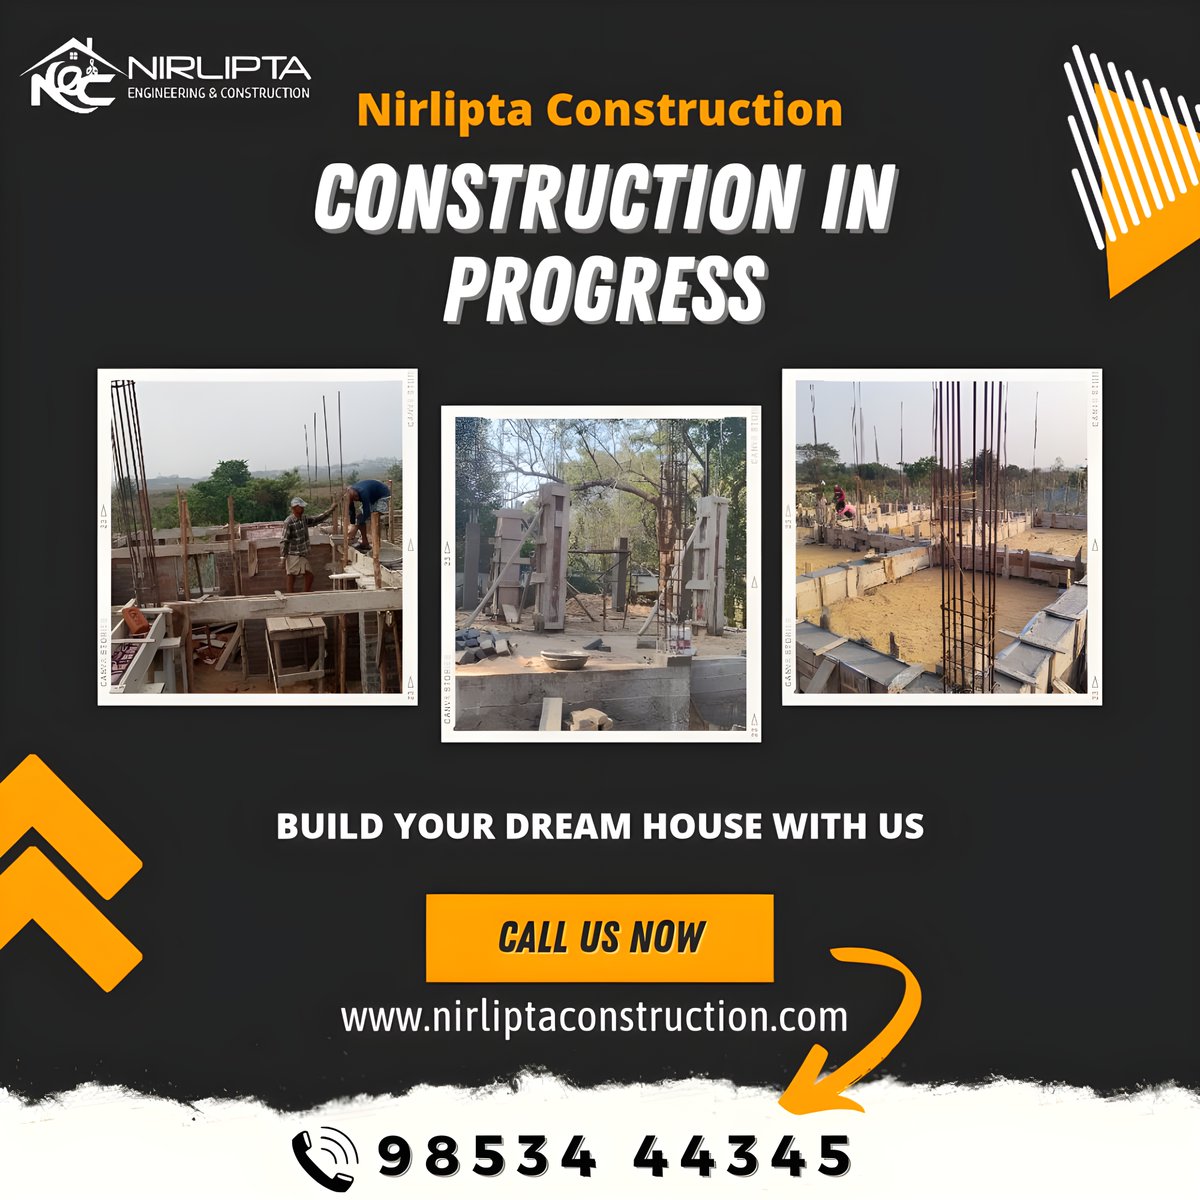 || Our new construction work is going on ||
Our skilled workers and engineers and working hard for this project. 
#ConstructionUpdate #newconstructionspecialist #Civilcontractor #constructionsite #newwork #newproject